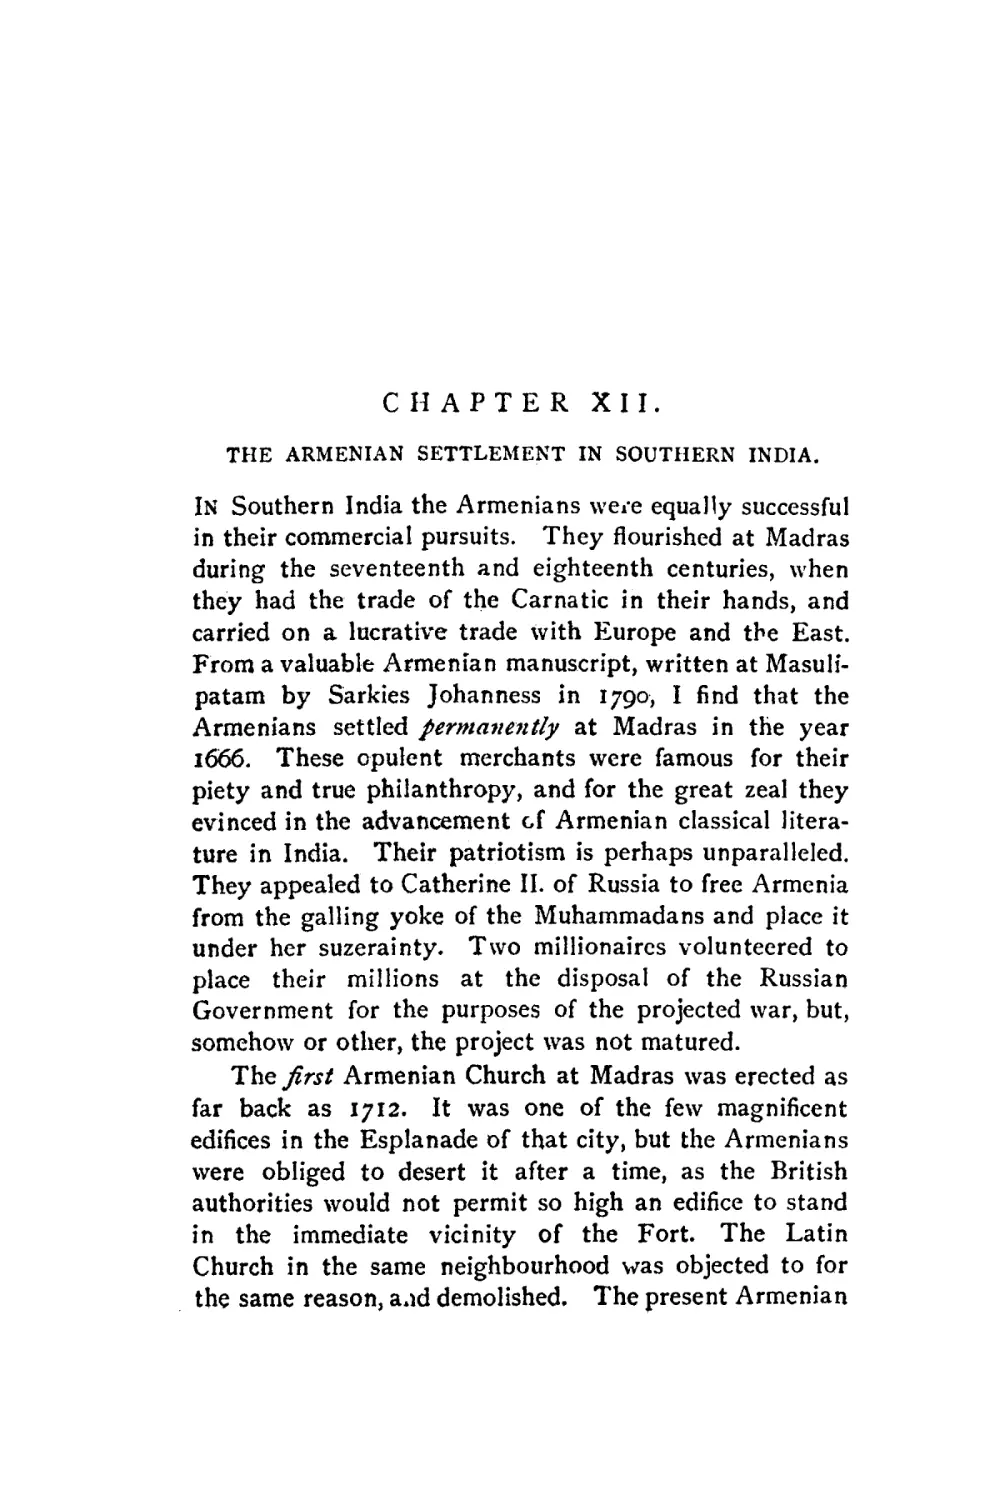 CHAPTER XII. THE ARMENIAN SETTLEMENT IN SOUTHERN INDIA